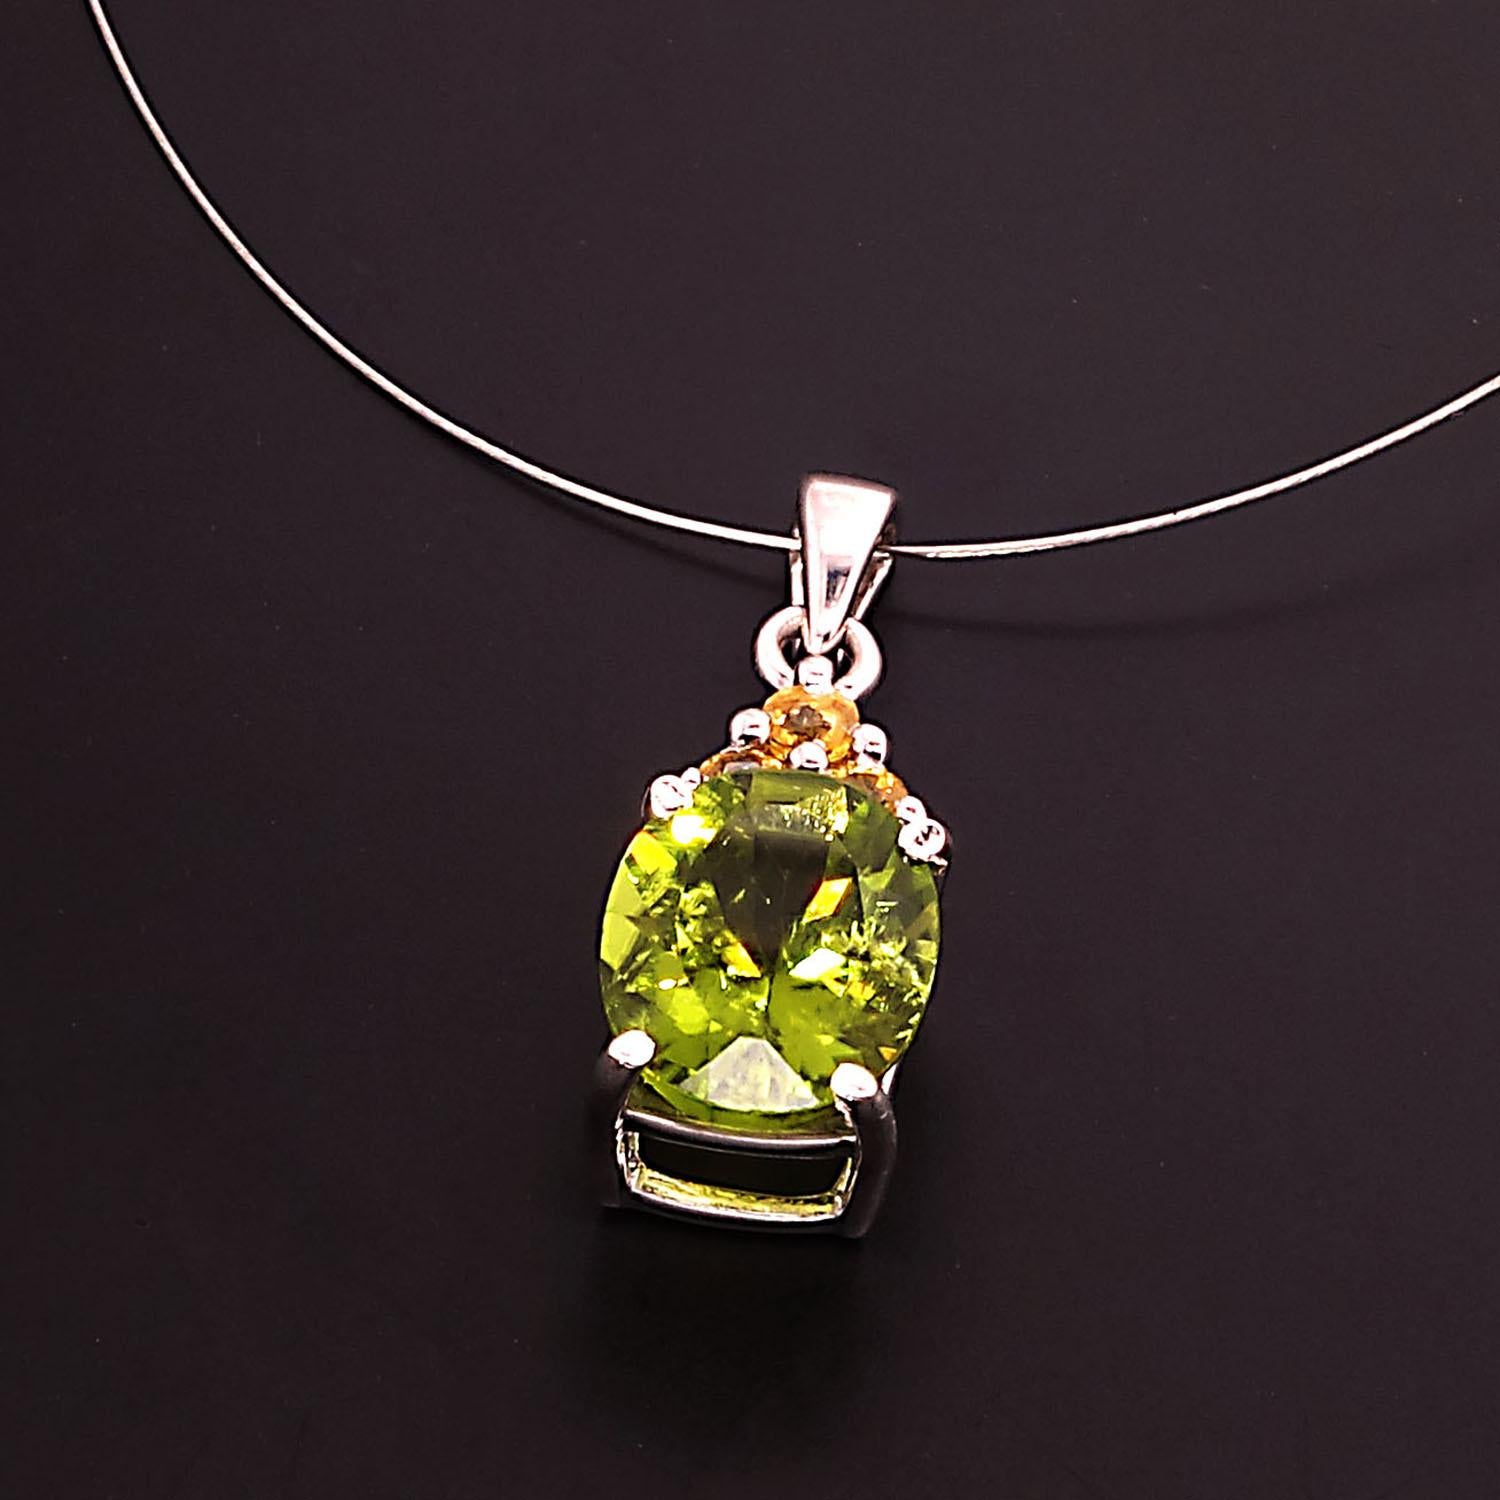 Unique, sparkling oval green Peridot pendant with accents of Yellow Sapphires.  This gorgeous pendant will sparkle and wink as you move.  The 3.85ct  peridot is accented with three Yellow Sapphires with a total weight of 0.37ct. The Peridot and